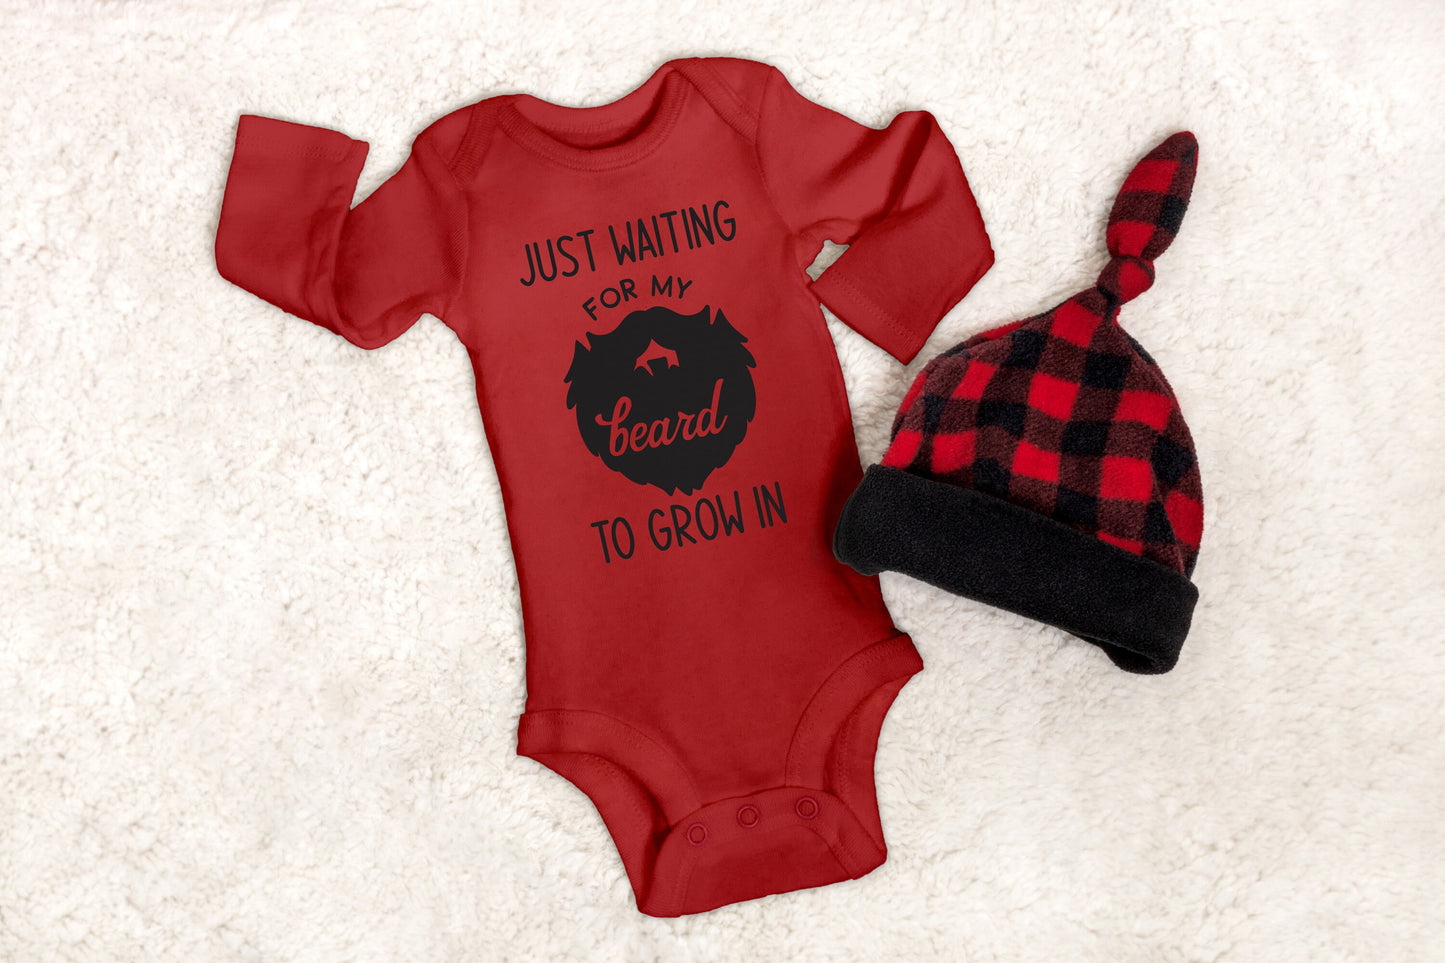 Just Waiting for My Beard to Grow In Shirt or Bodysuit - fathers day shirt - new dad gift - bearded daddy - future beard owner - lumberjack